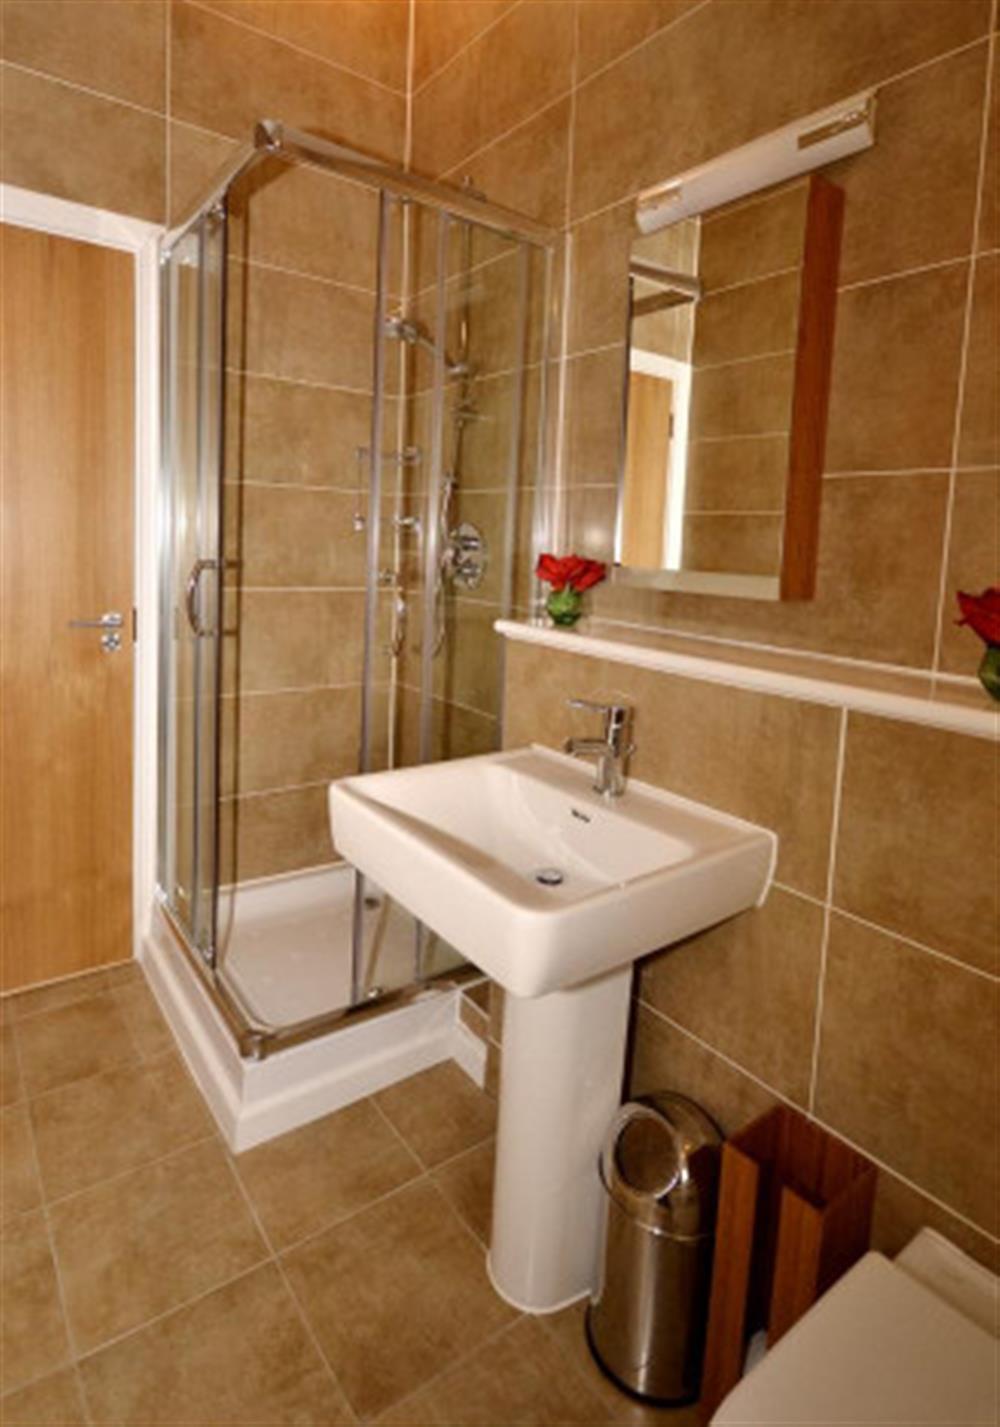 The bathroom showing the shower cubicle at 40 Talland in Talland Bay